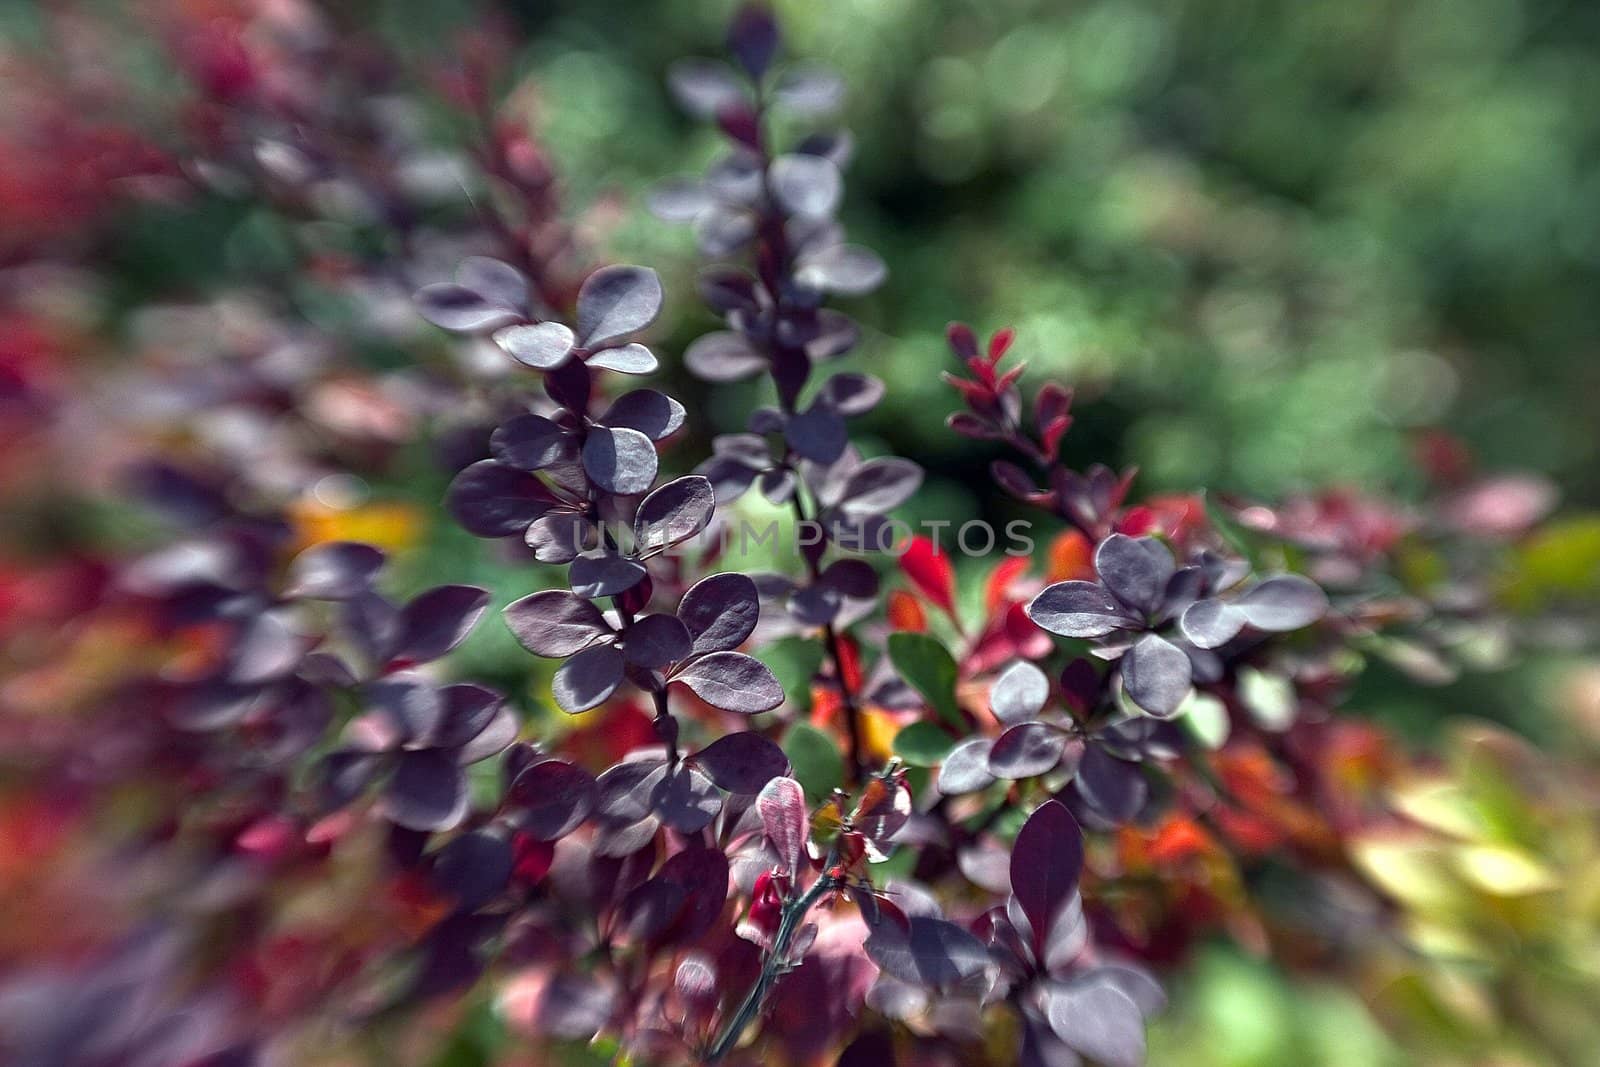 beautiful color effect of the blurred background lensbaby 